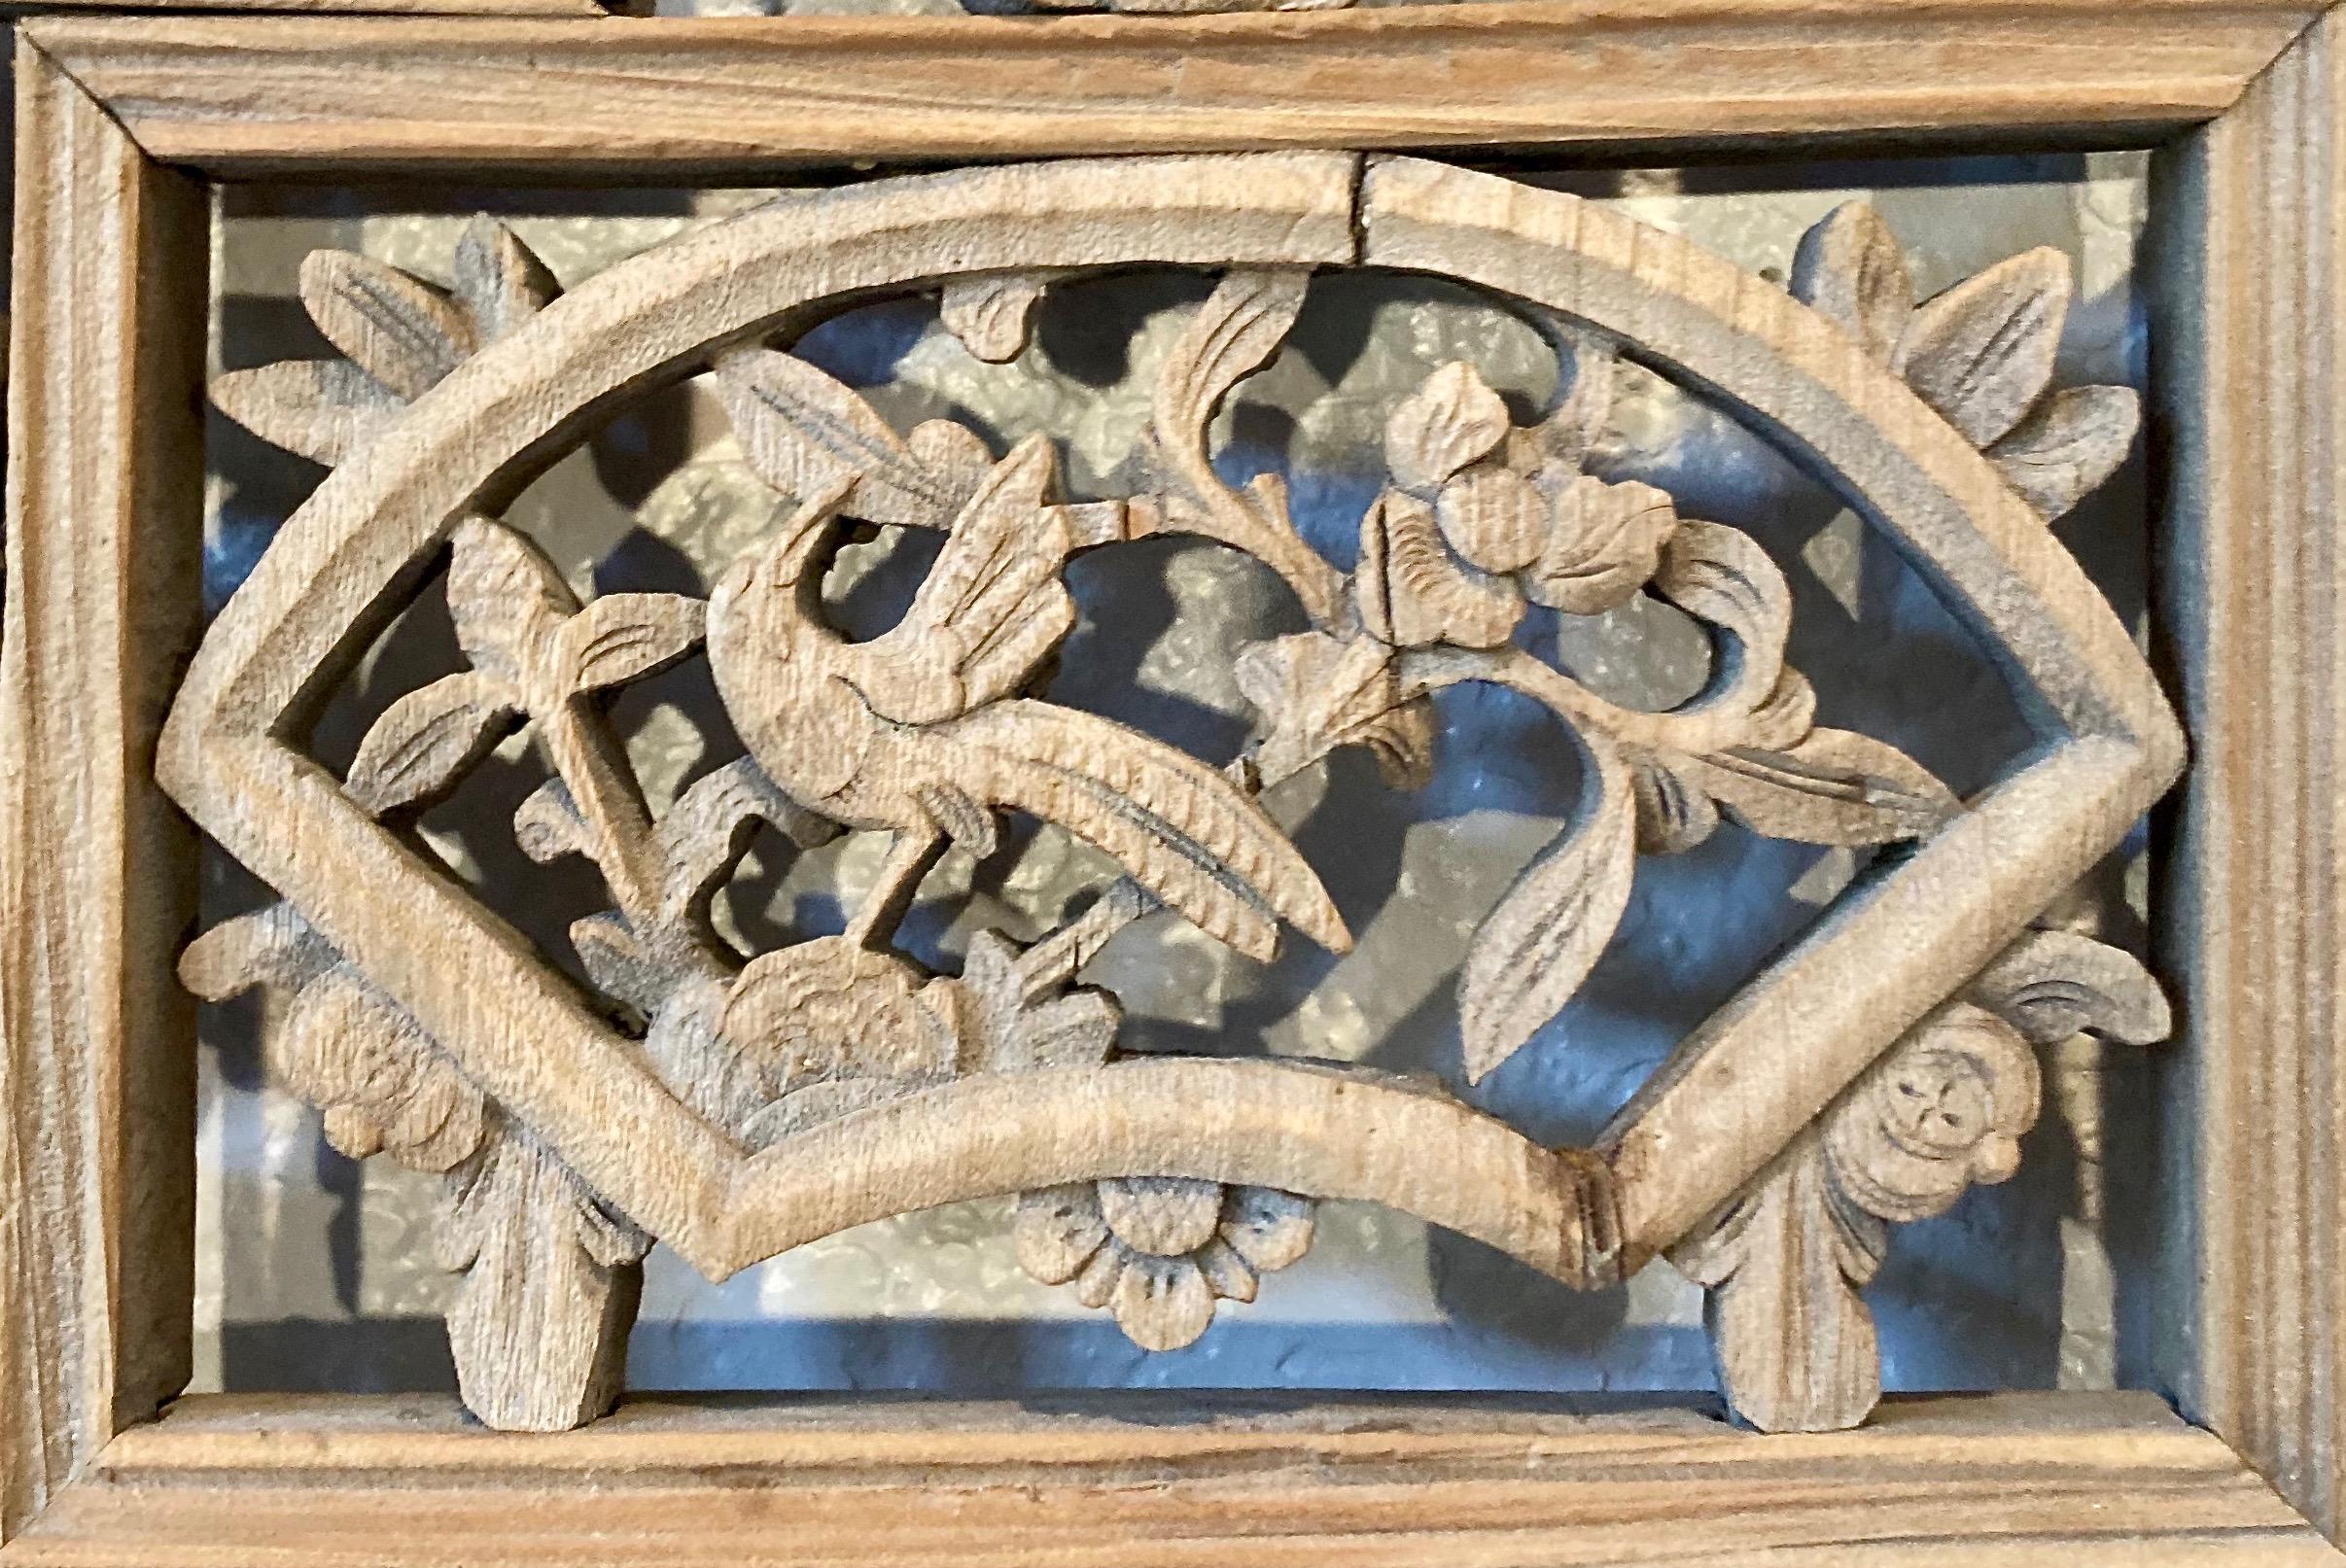 Thick framed panel with three panes, openwork and relief carvings, and lattice work. Fan shaped center carving with bird/floral motif. Lower pane likely depicts ancient Chinese agriculture.